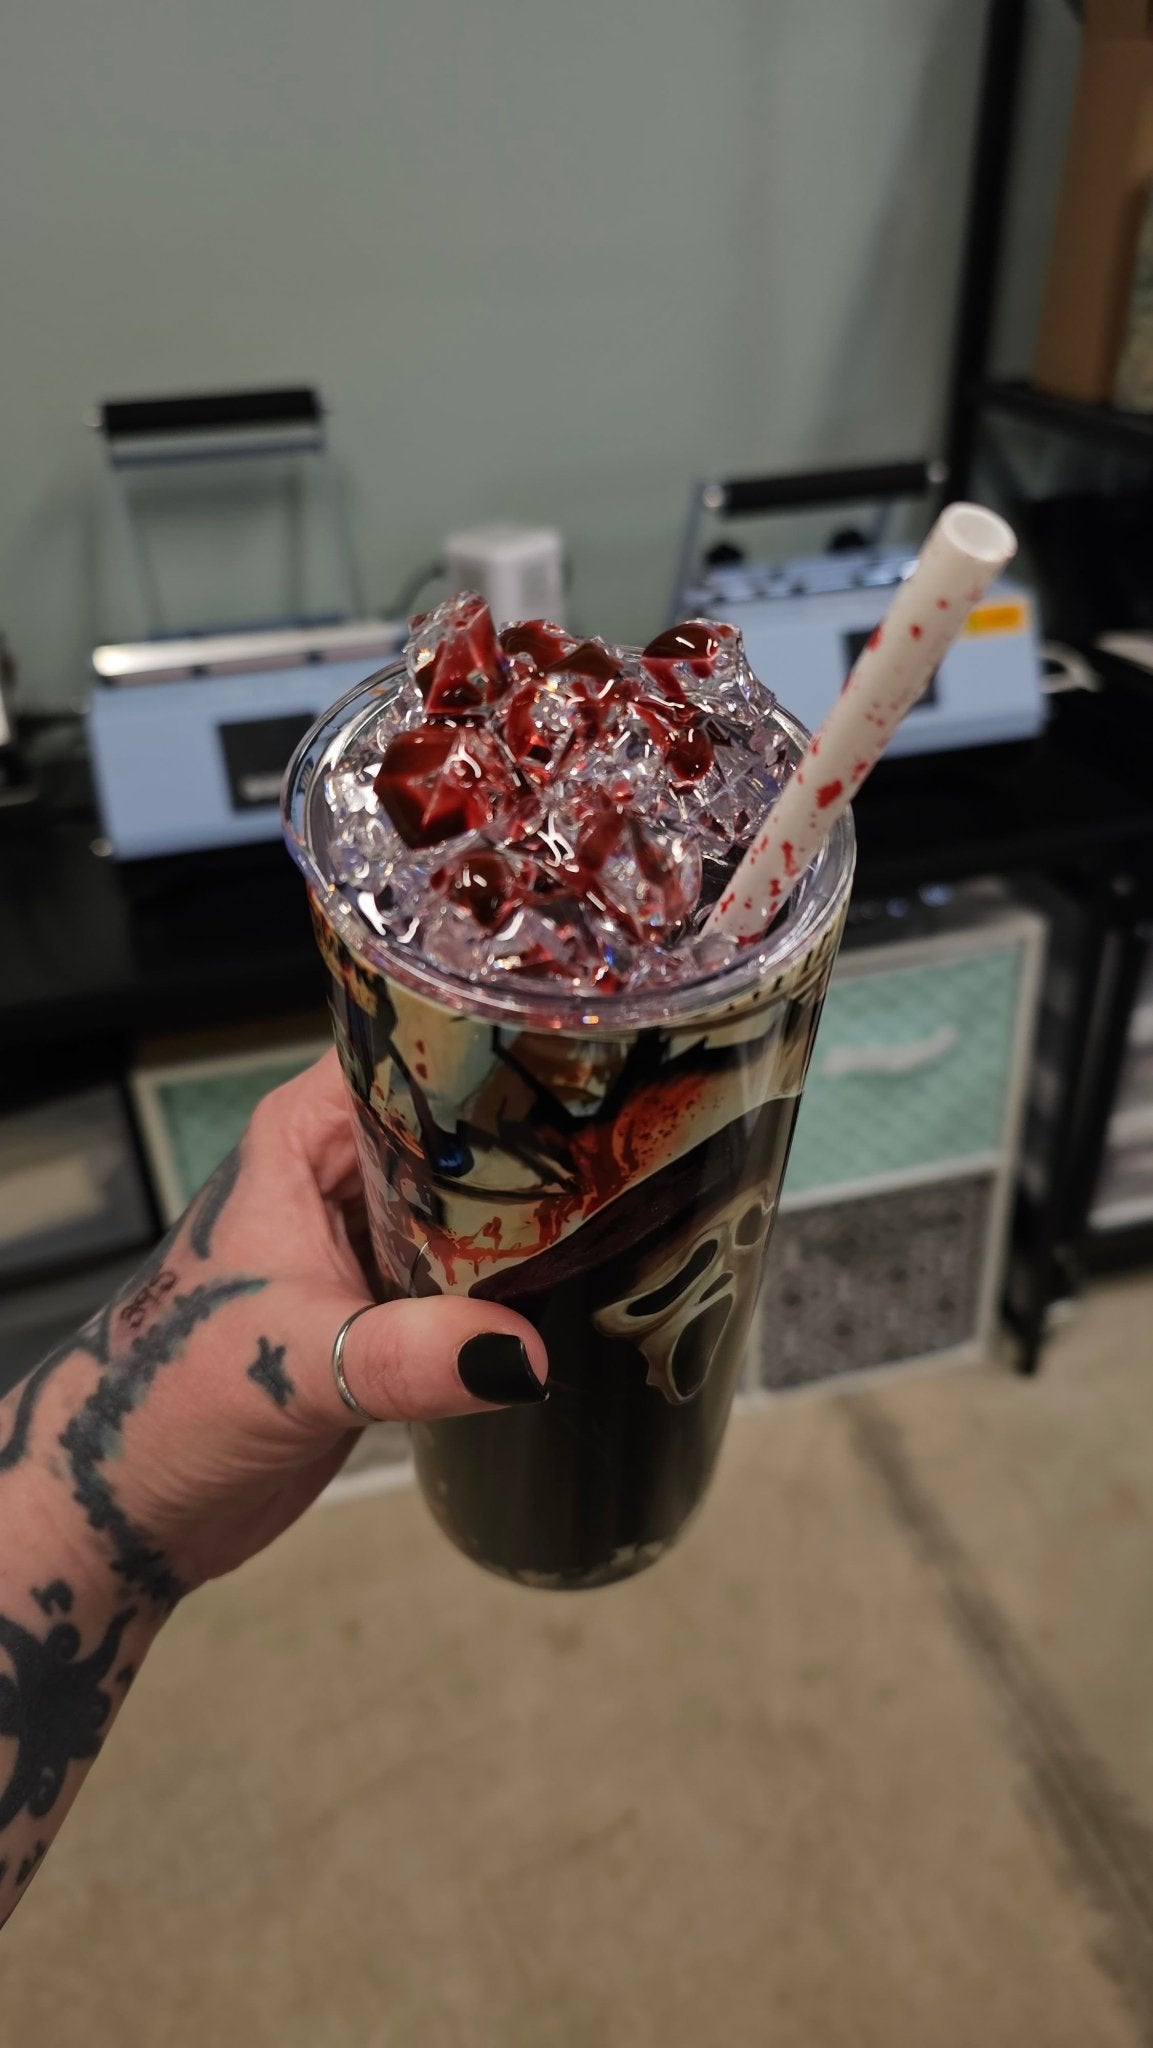 Bloodied scream filled tumbler